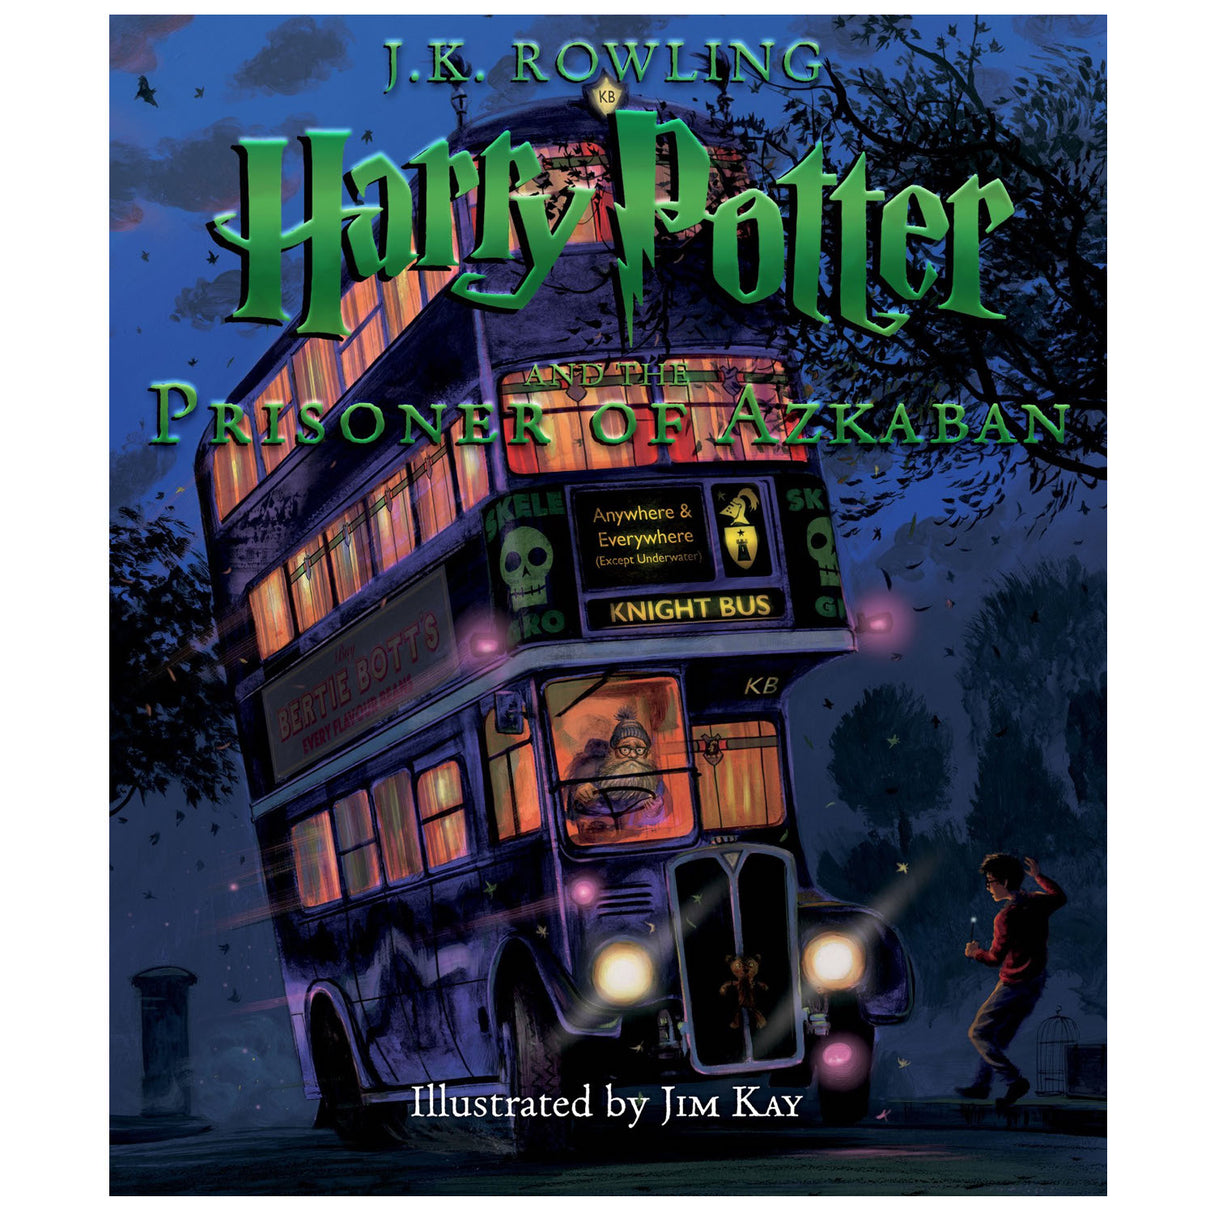 Harry Potter and the Prisoner of Azkaban Illustrated Edition